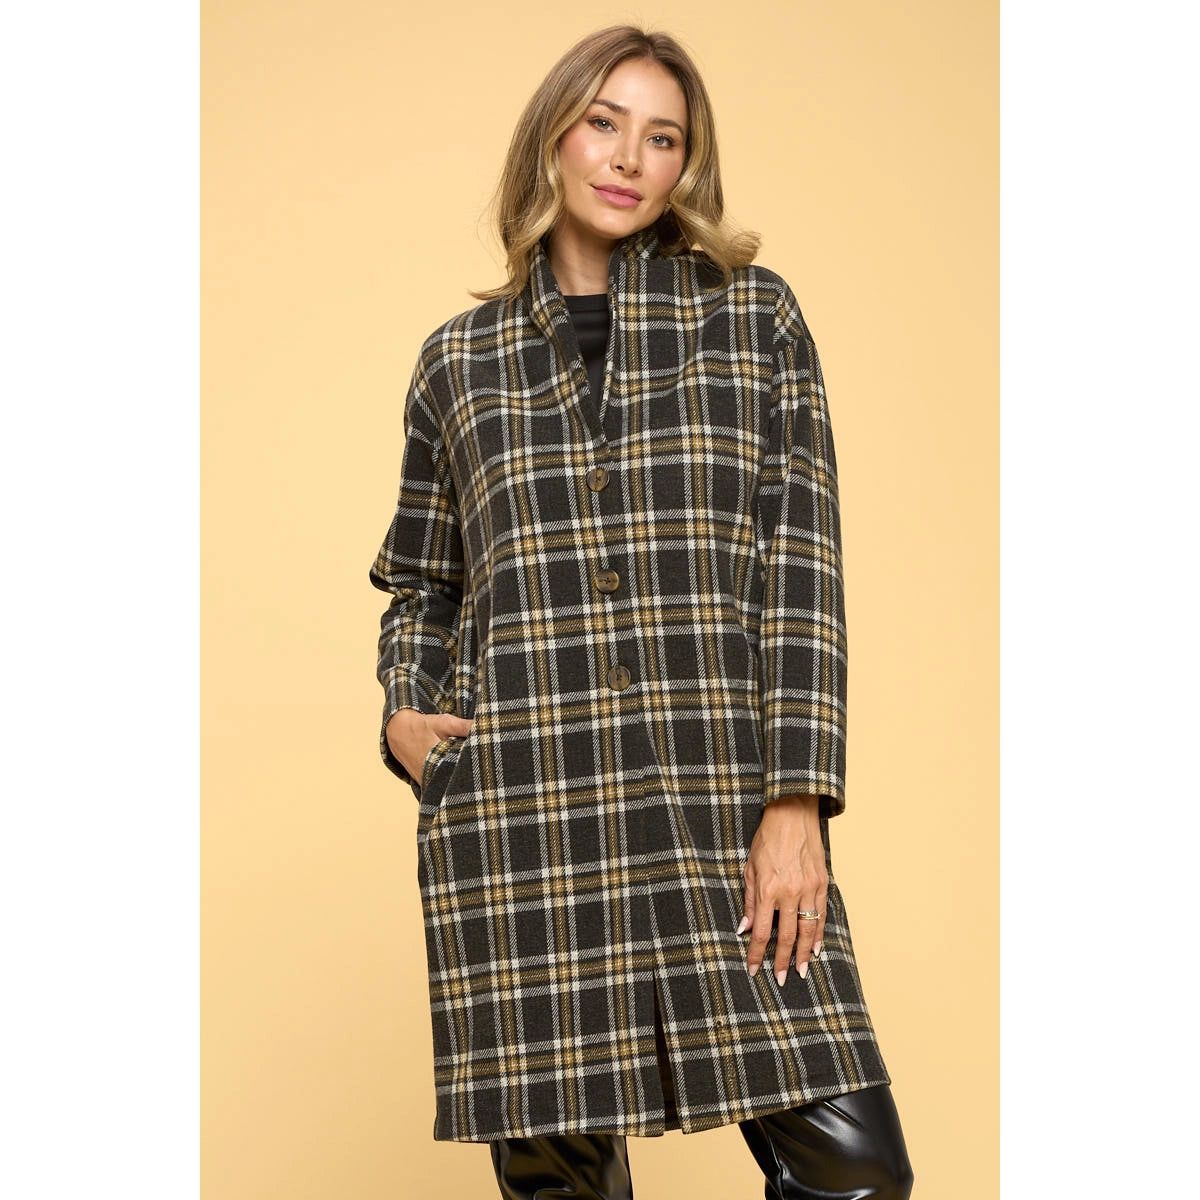 Plaid Coat with Buttons and Pockets - BTK COLLECTION